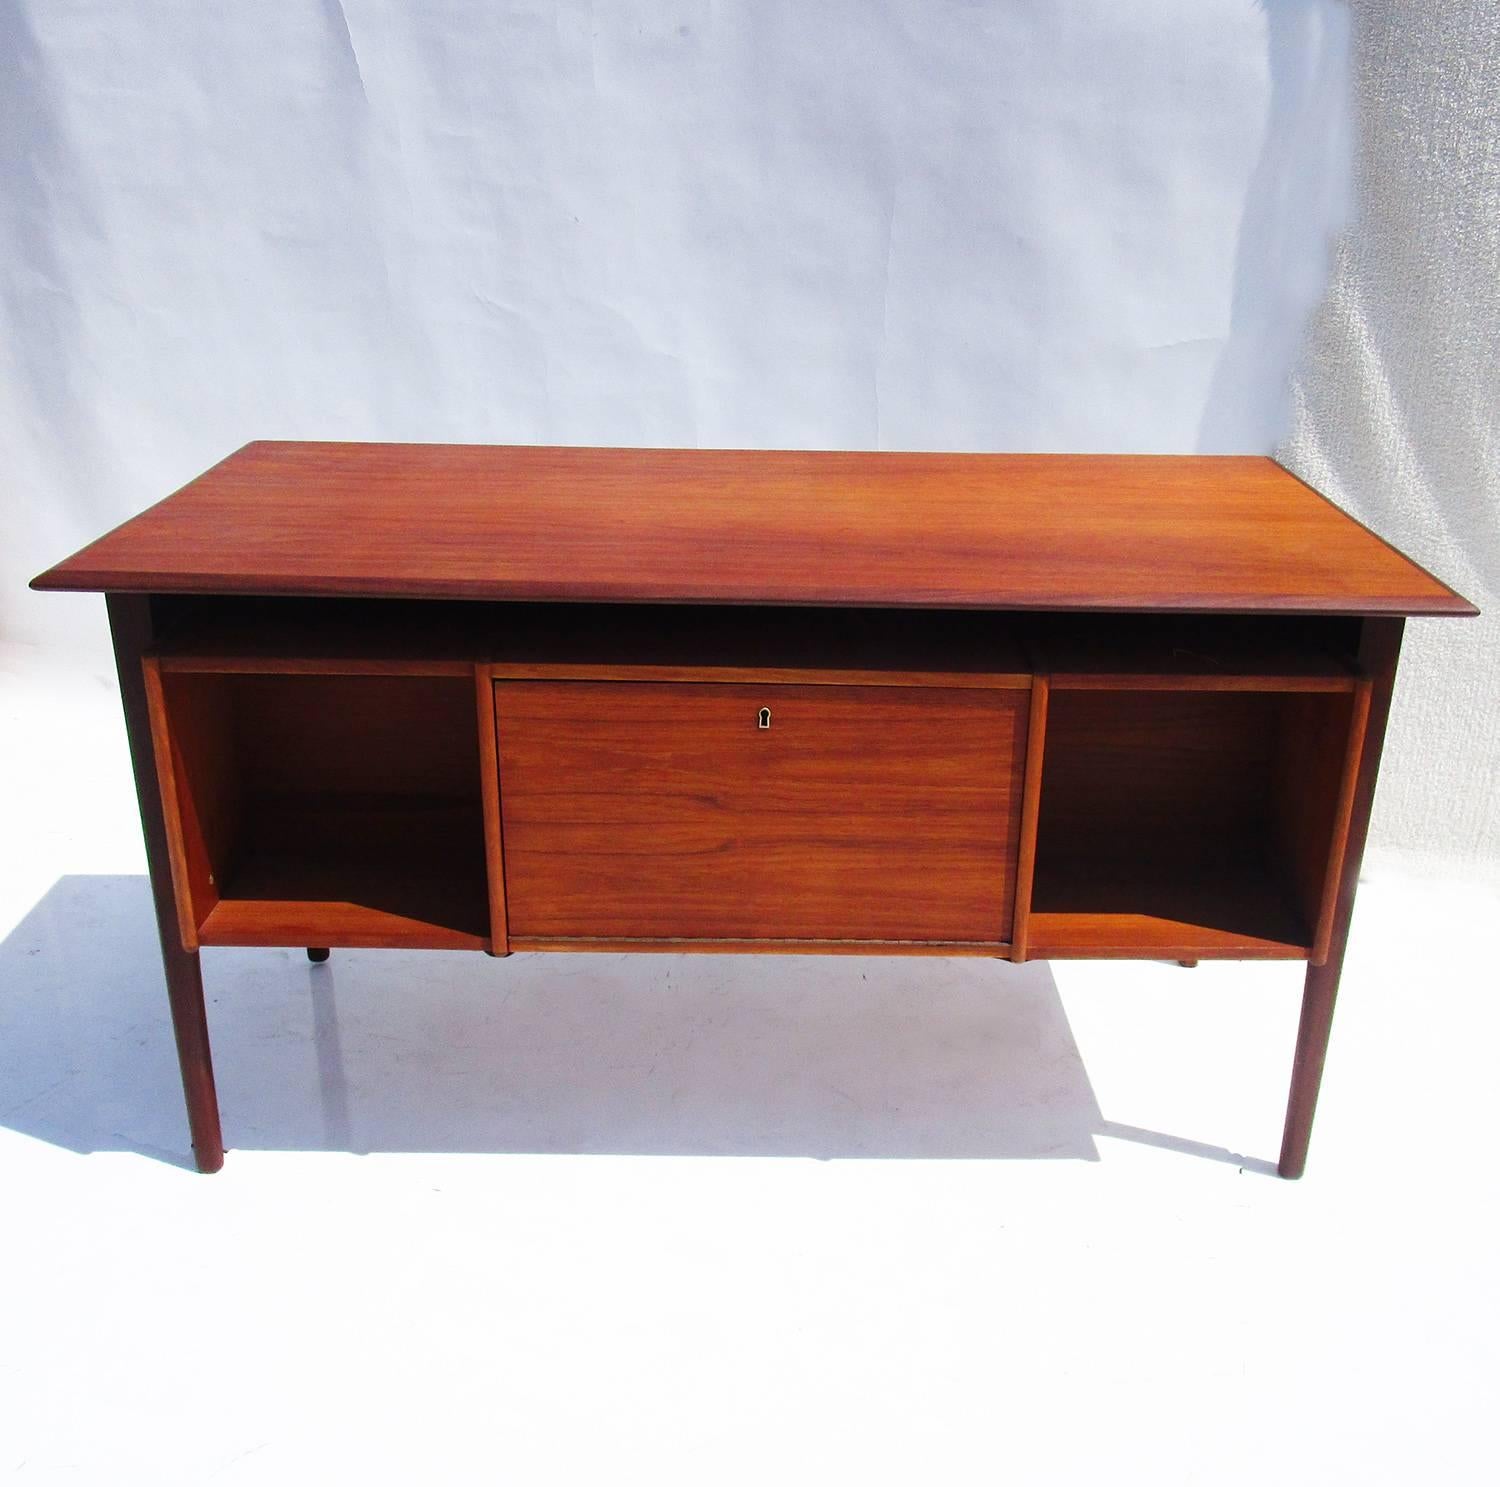 Mid-20th Century Danish Modern Teak Desk with Bookcase Front For Sale